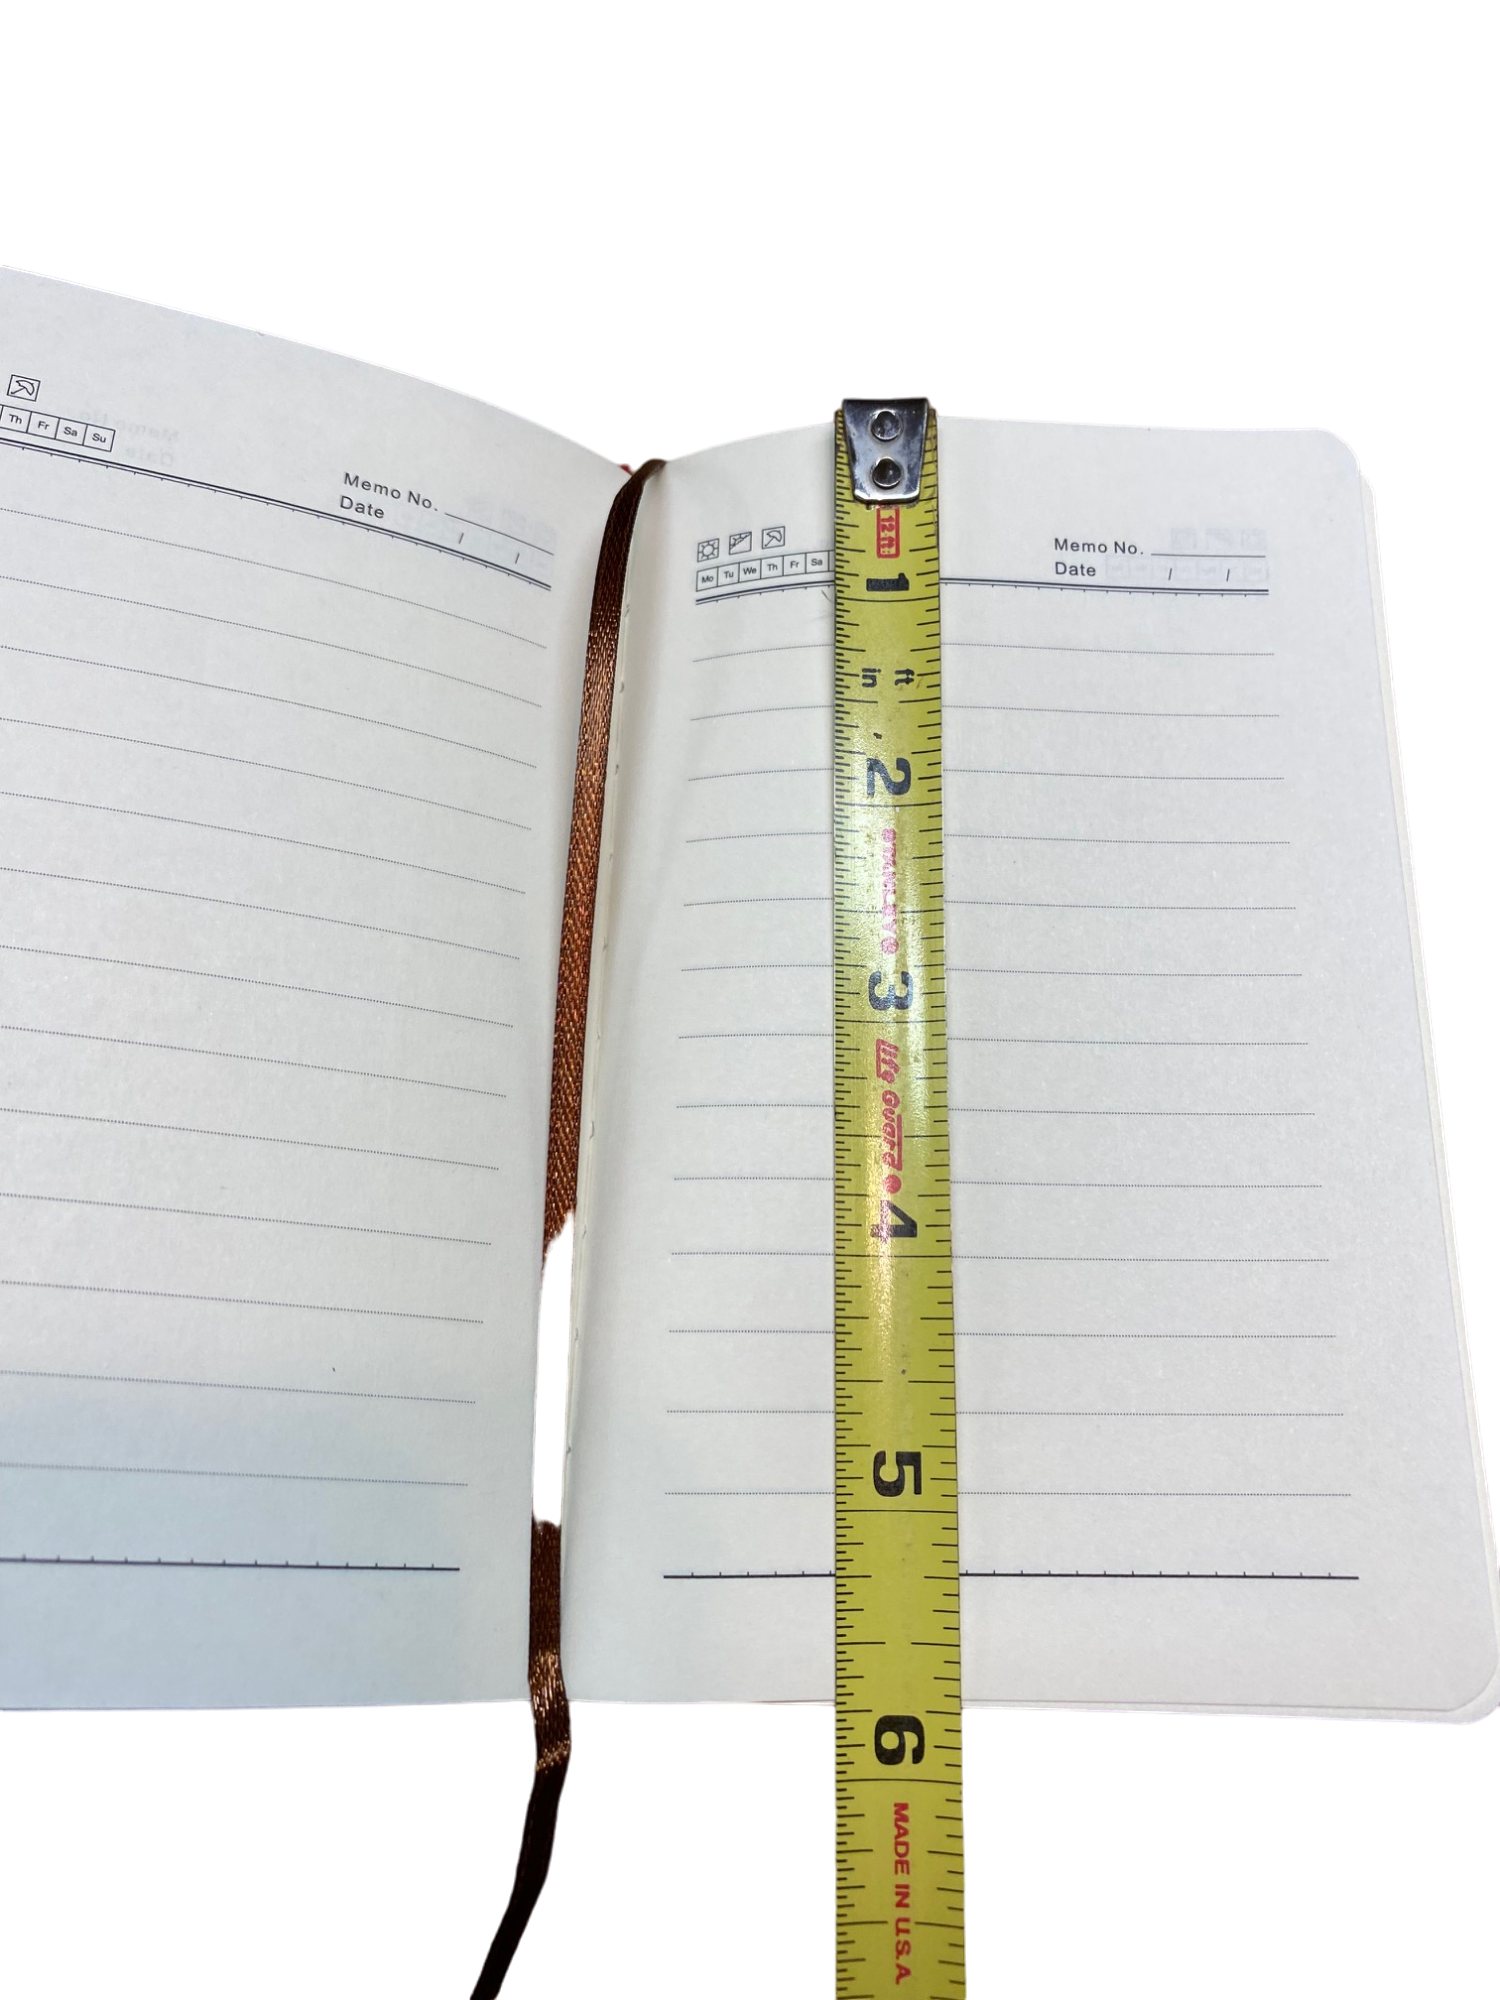 Journal pages measure approx 5.75 inches in height